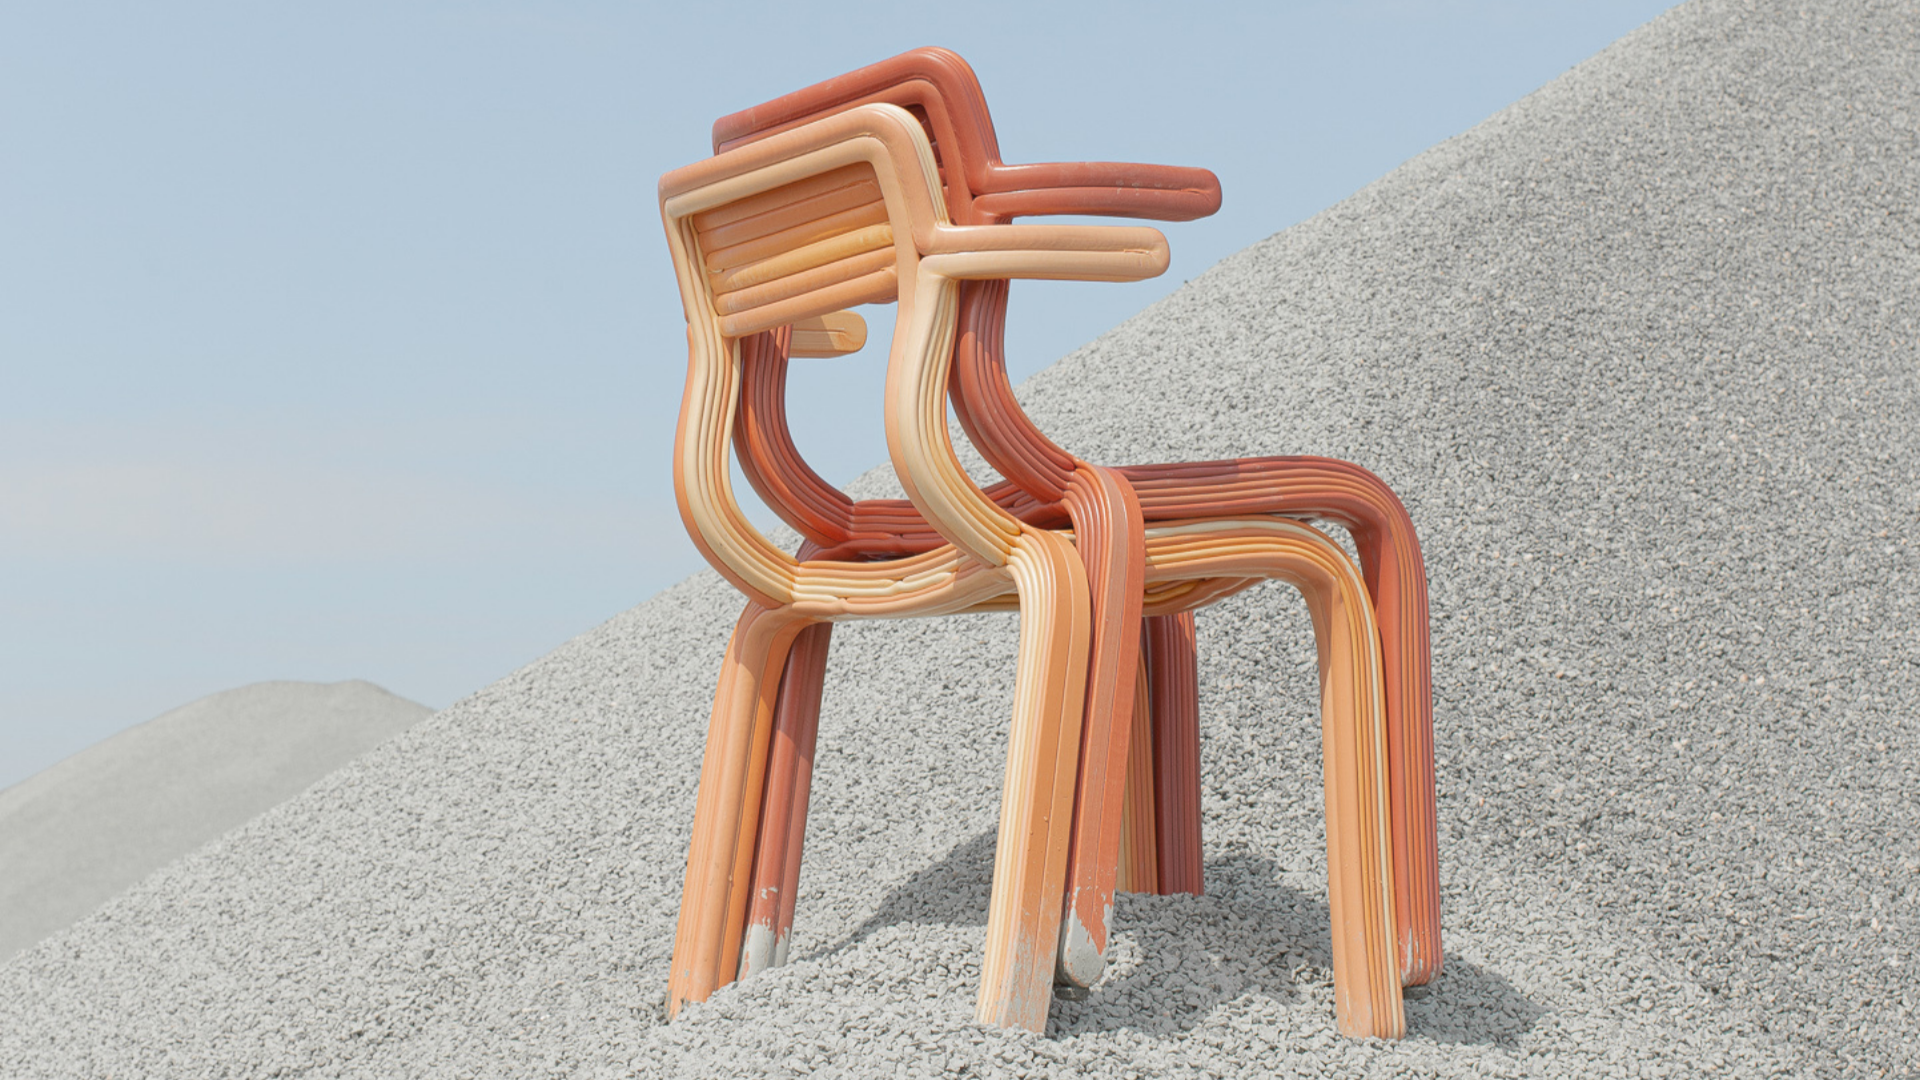 Two stacked chairs made of recycled fridge interiors, shown in an outdoor landscape of rocky terrain. 